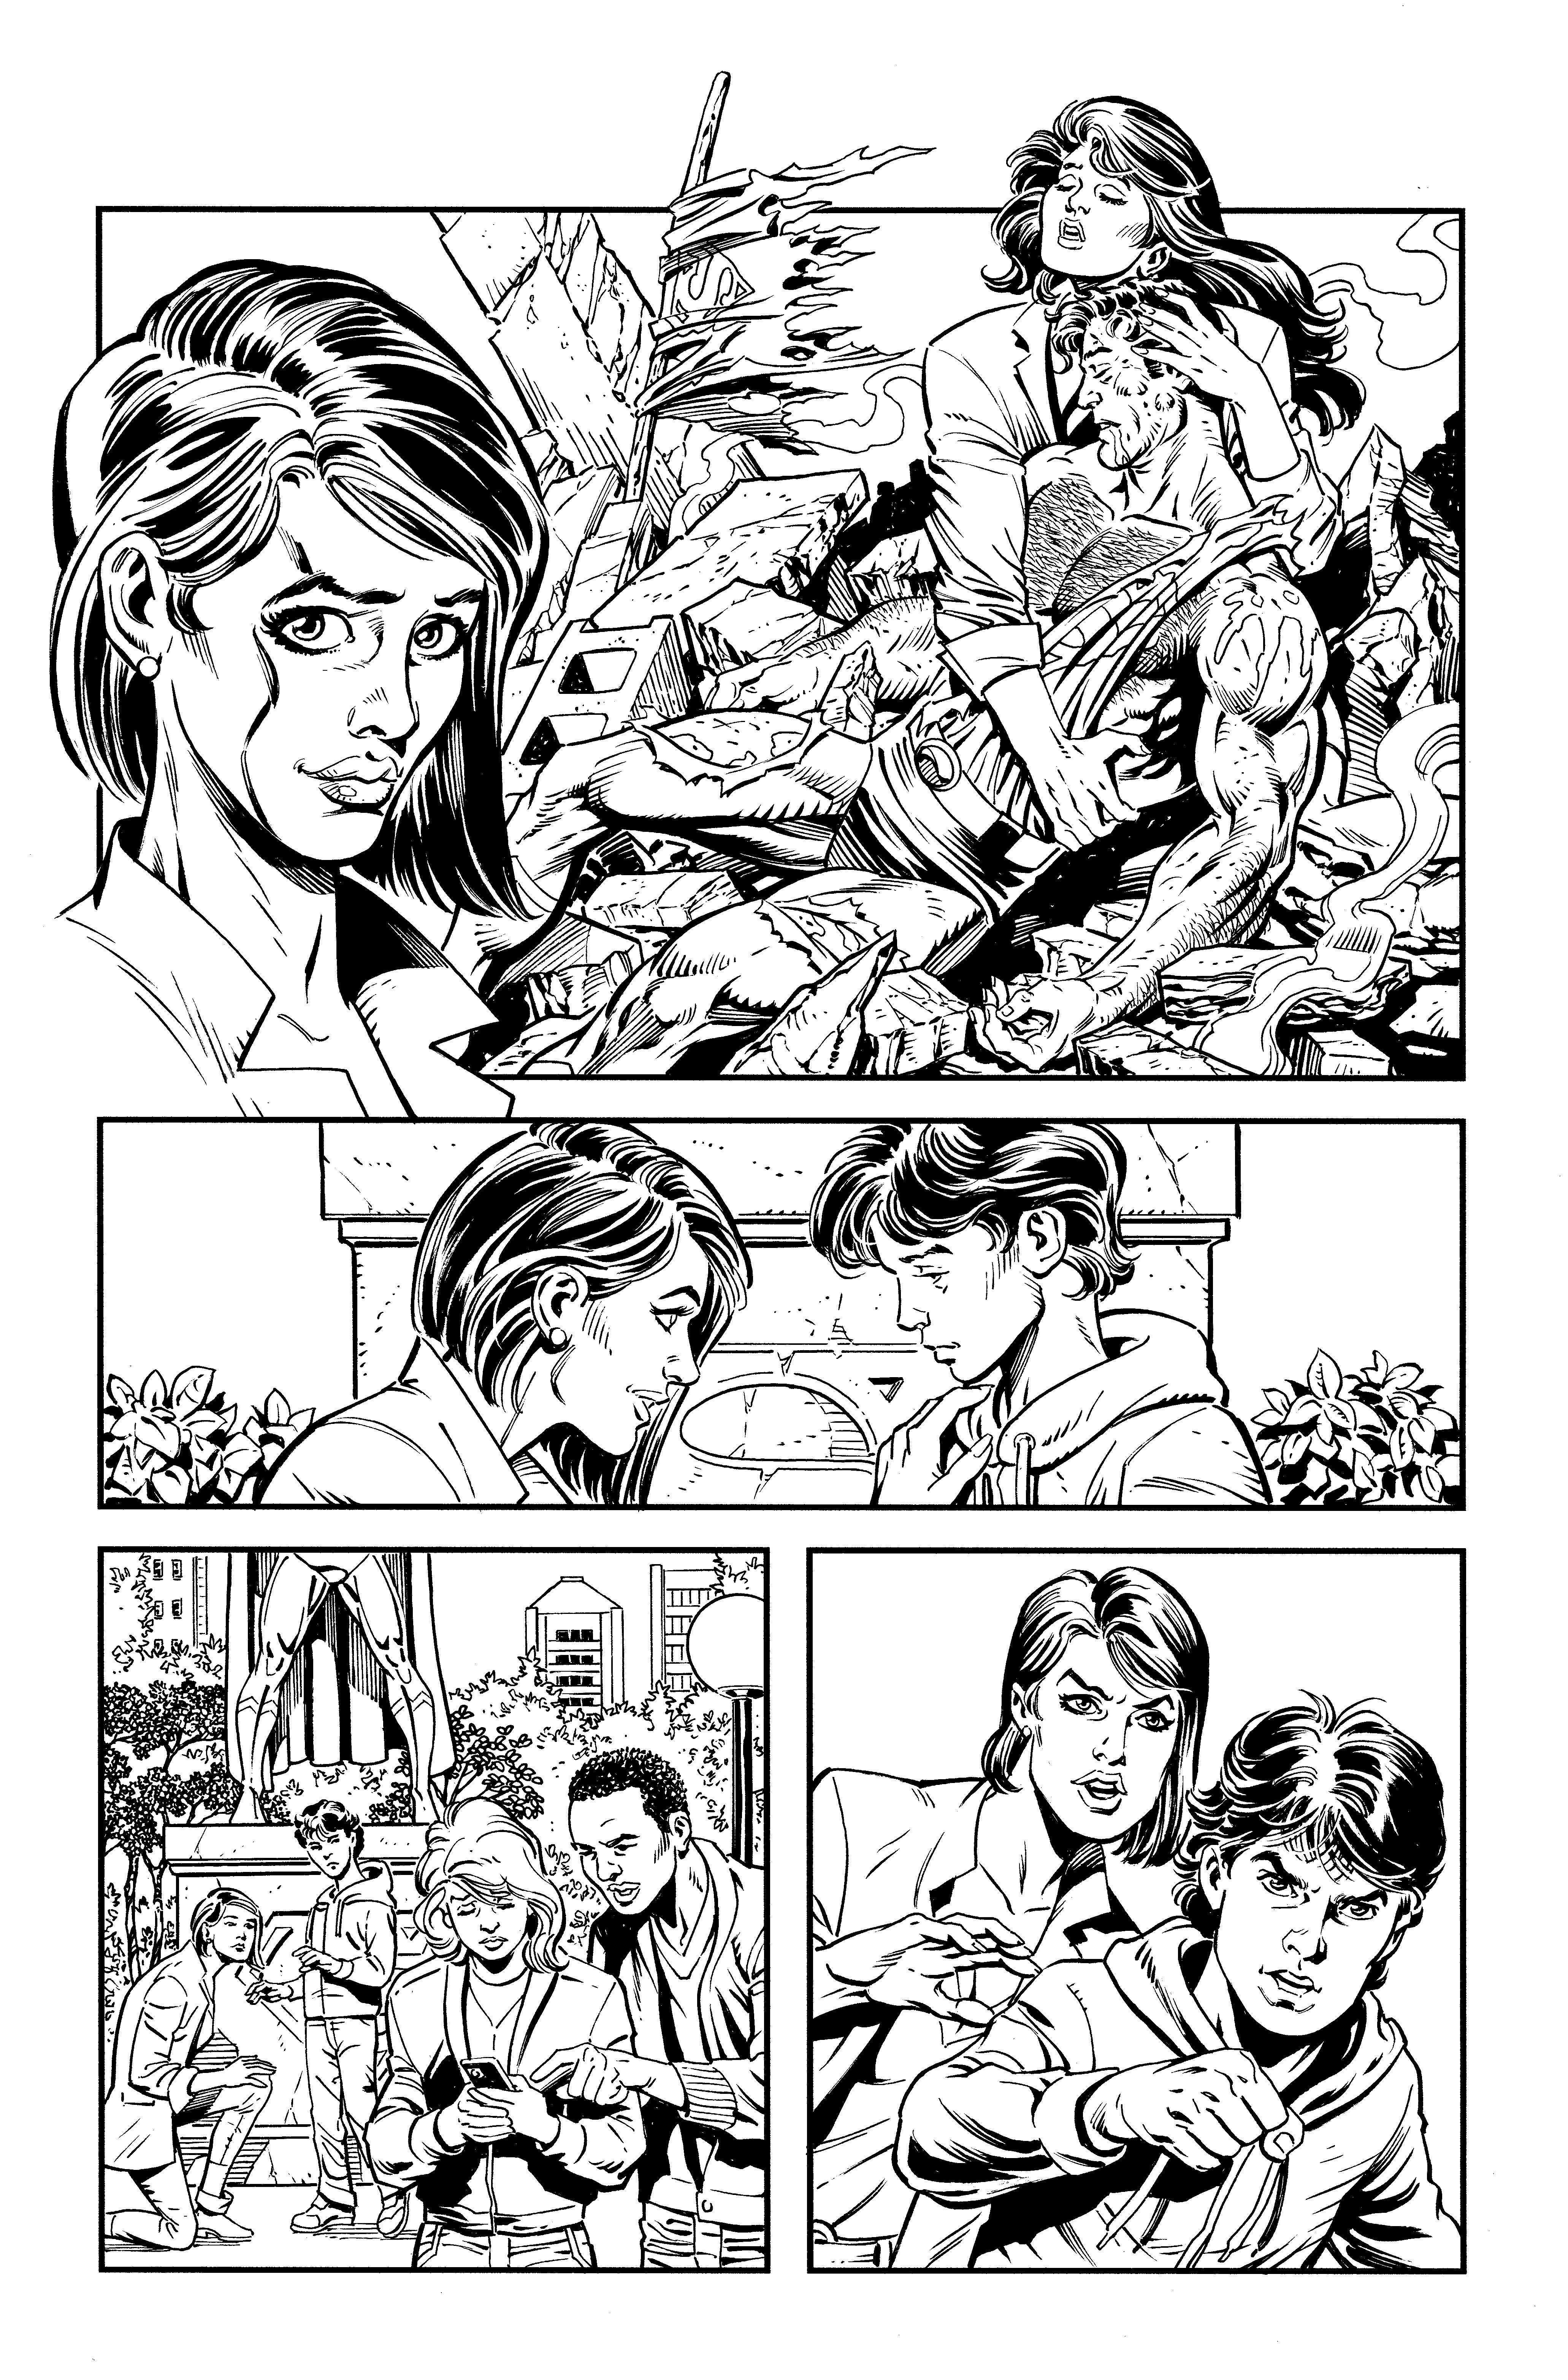 Death of Superman 30th Anniversary Special #1 preview page